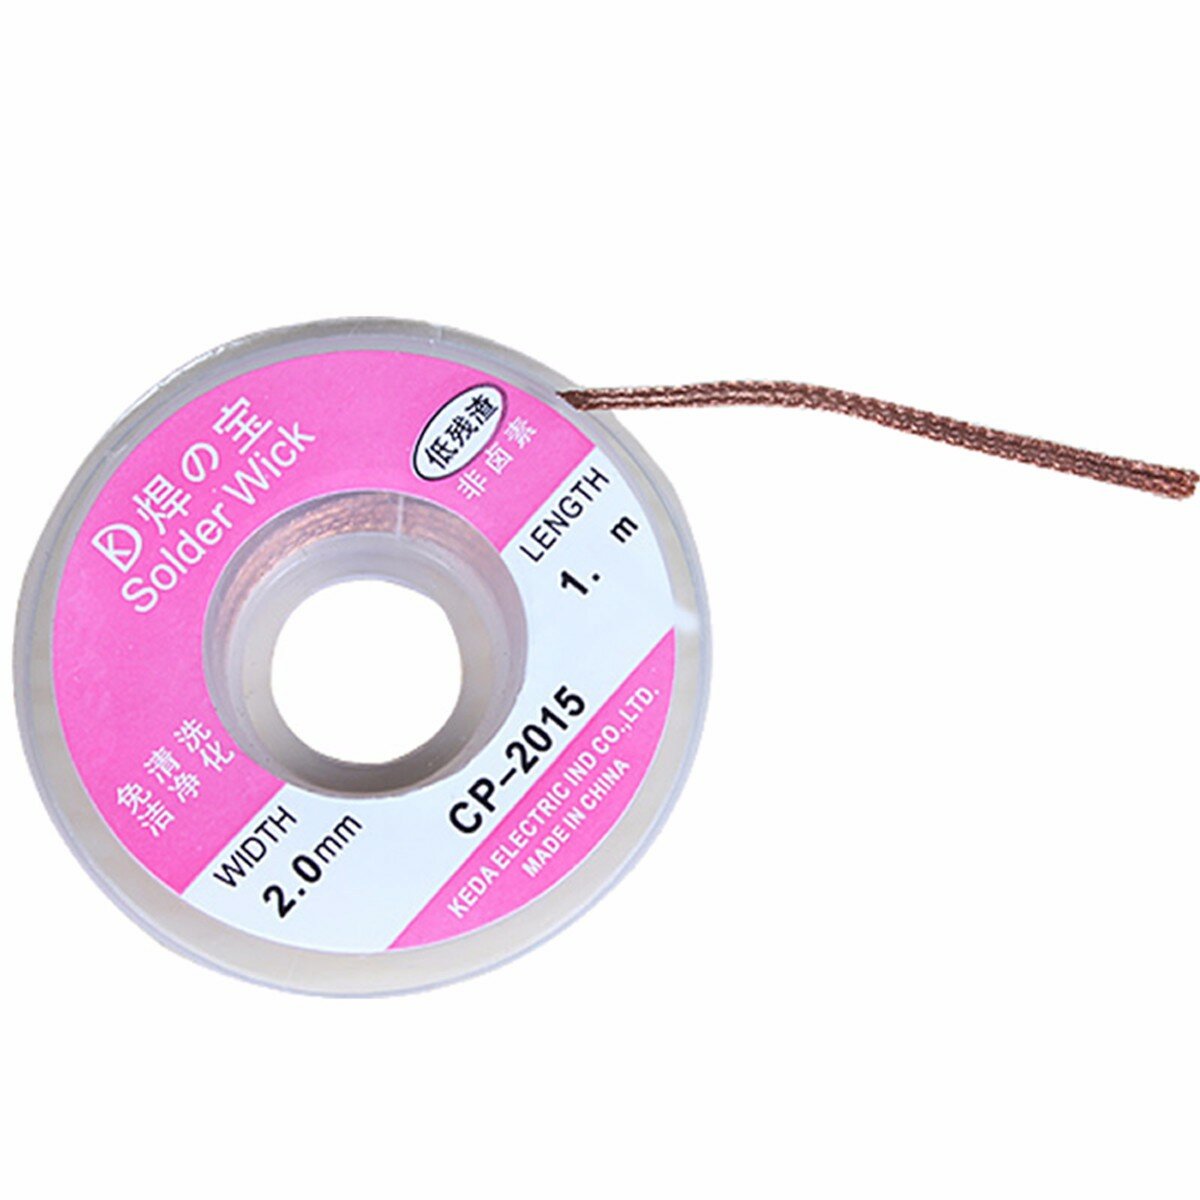 

2.0mm 0.75m Desoldering Braid Solder Remover Wick Cable Wire